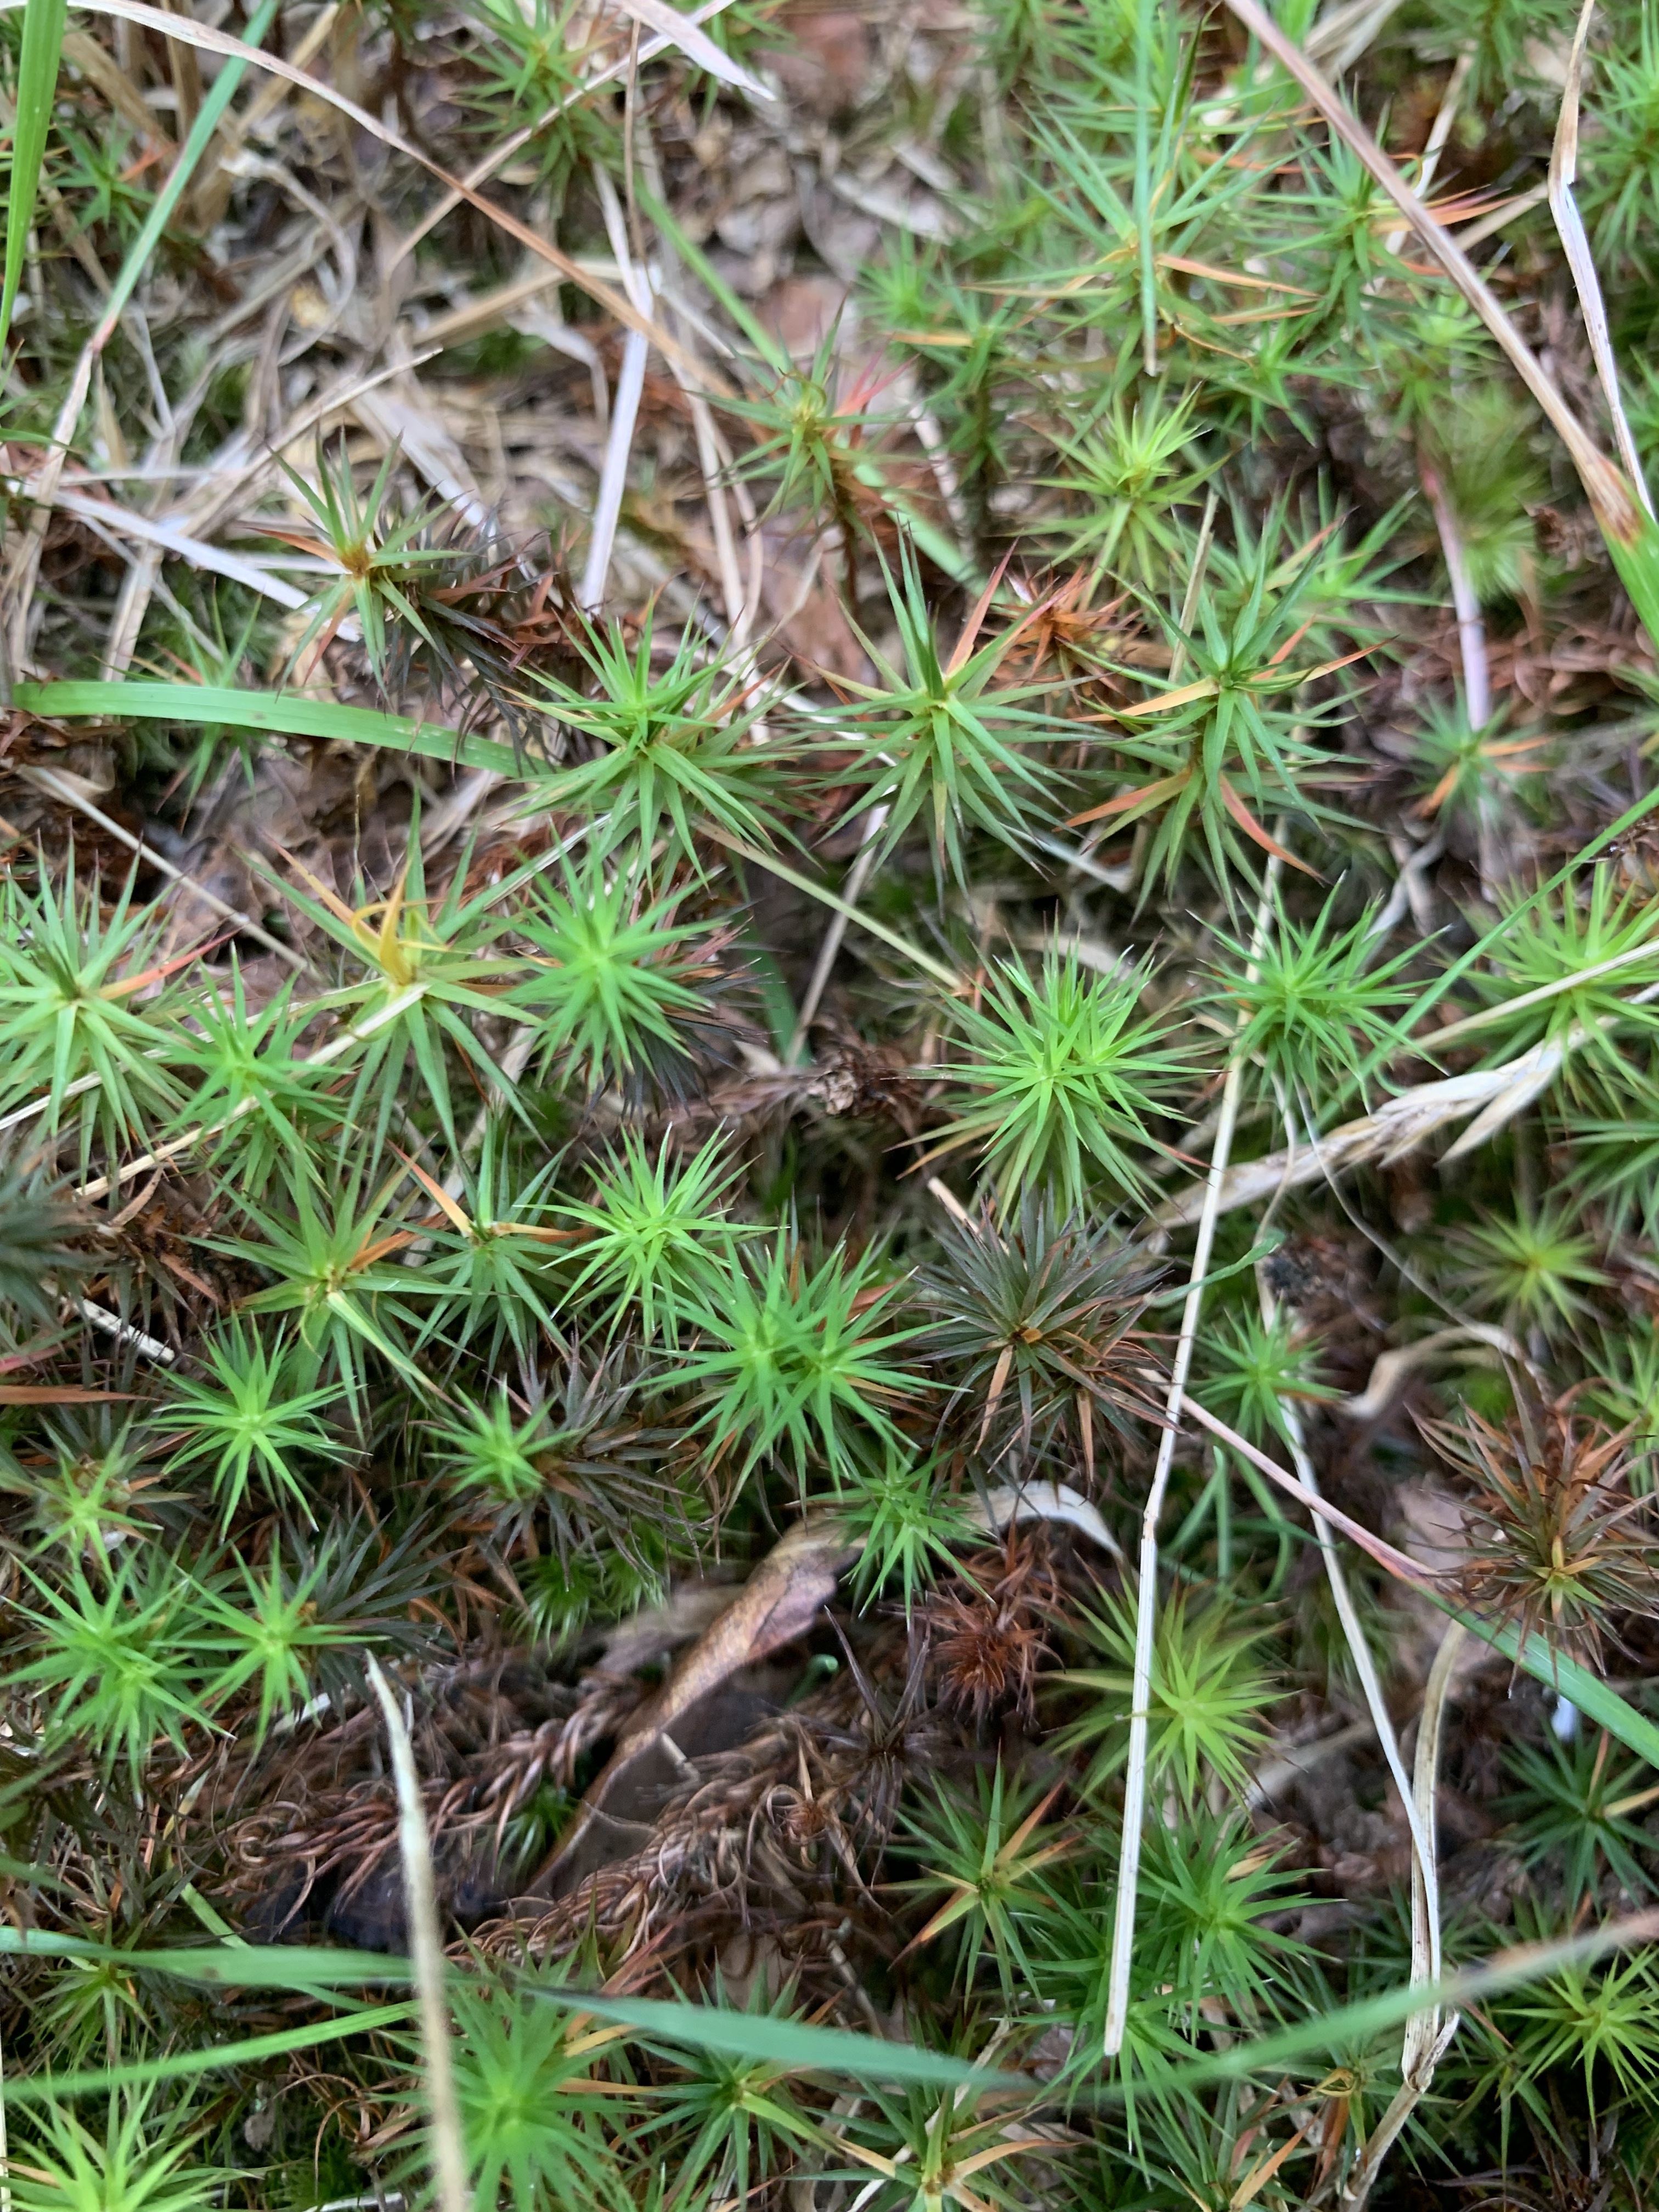  I think this is Juniper Haircap Moss. Apparently very common but I love the way it looks, like a tiny evergreen forest. 